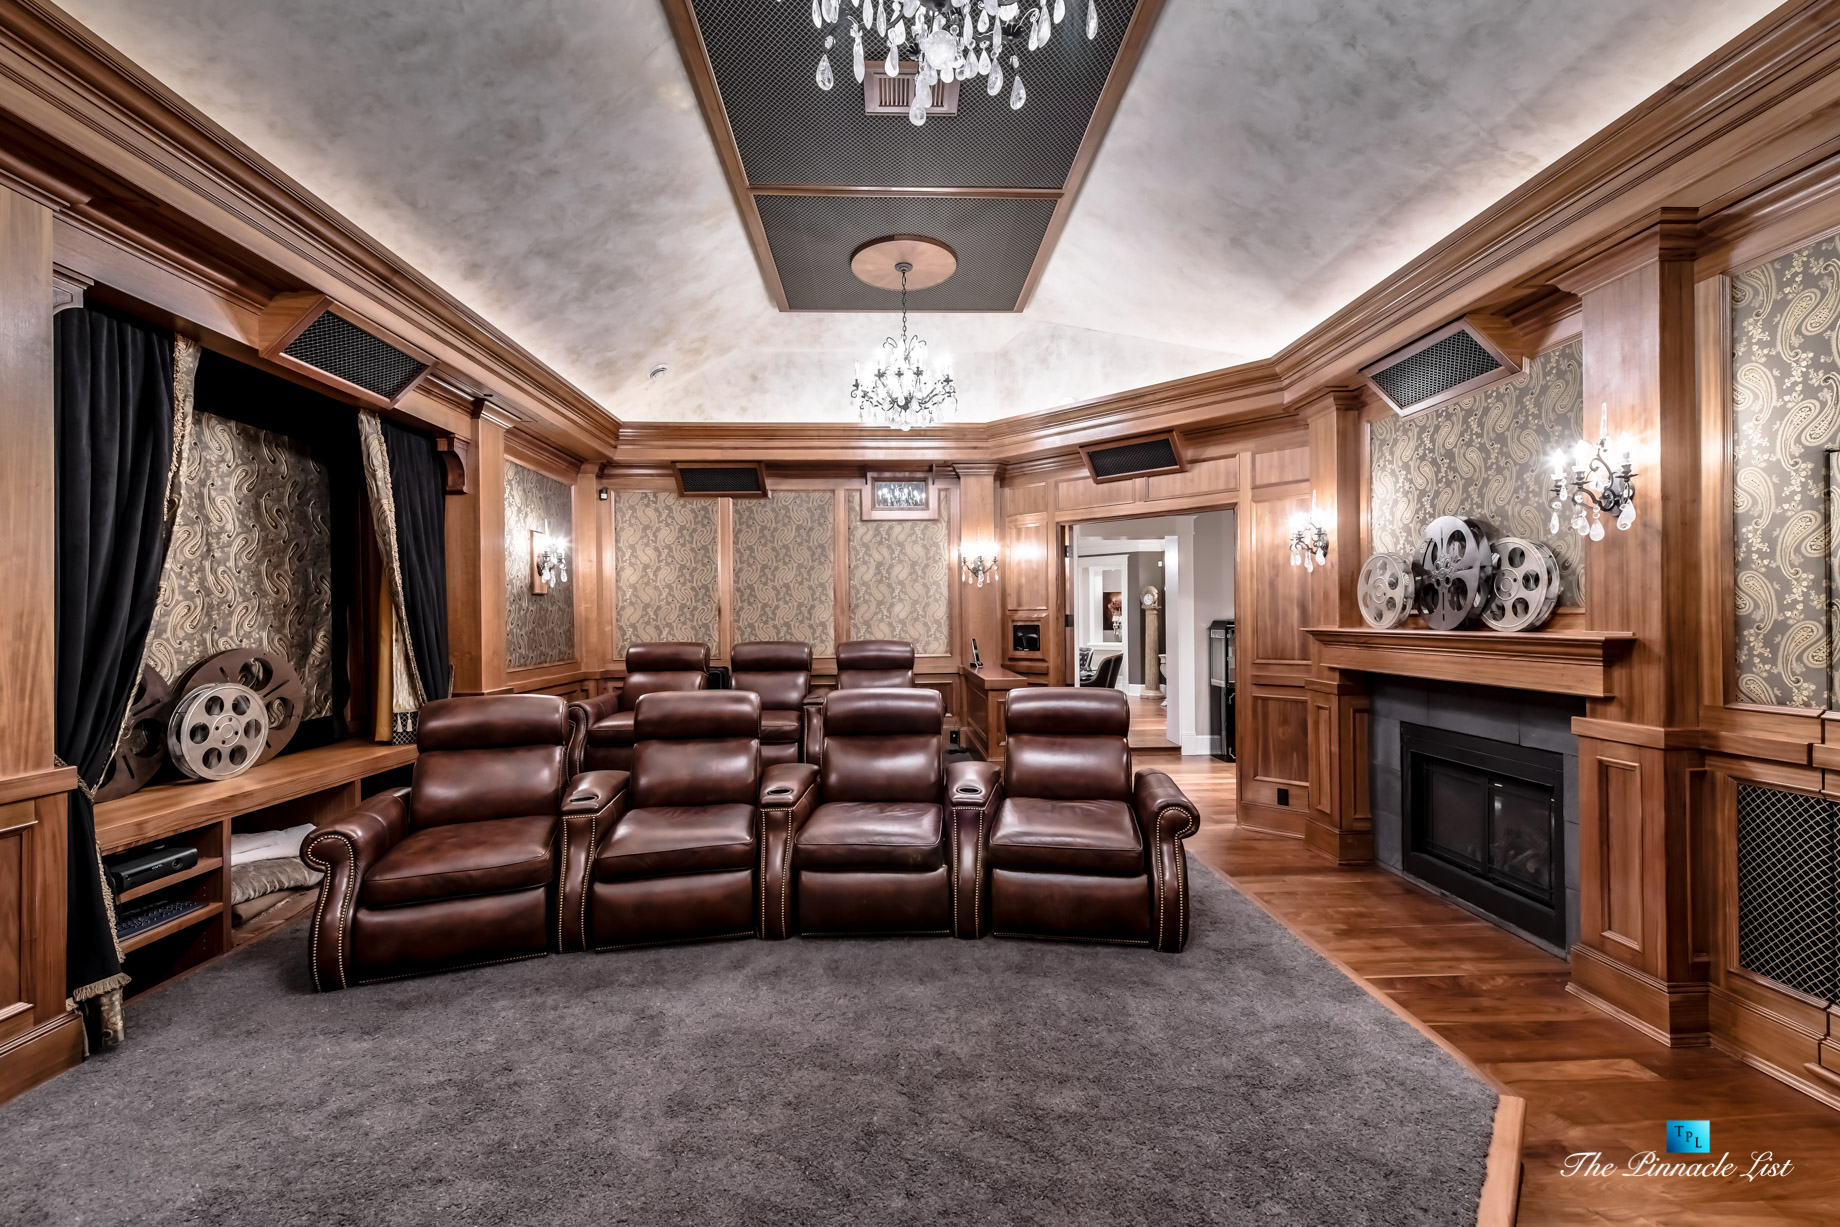 3053 Anmore Creek Way, Anmore, BC, Canada - Luxurious Theatre Room - Luxury Real Estate - Greater Vancouver Home